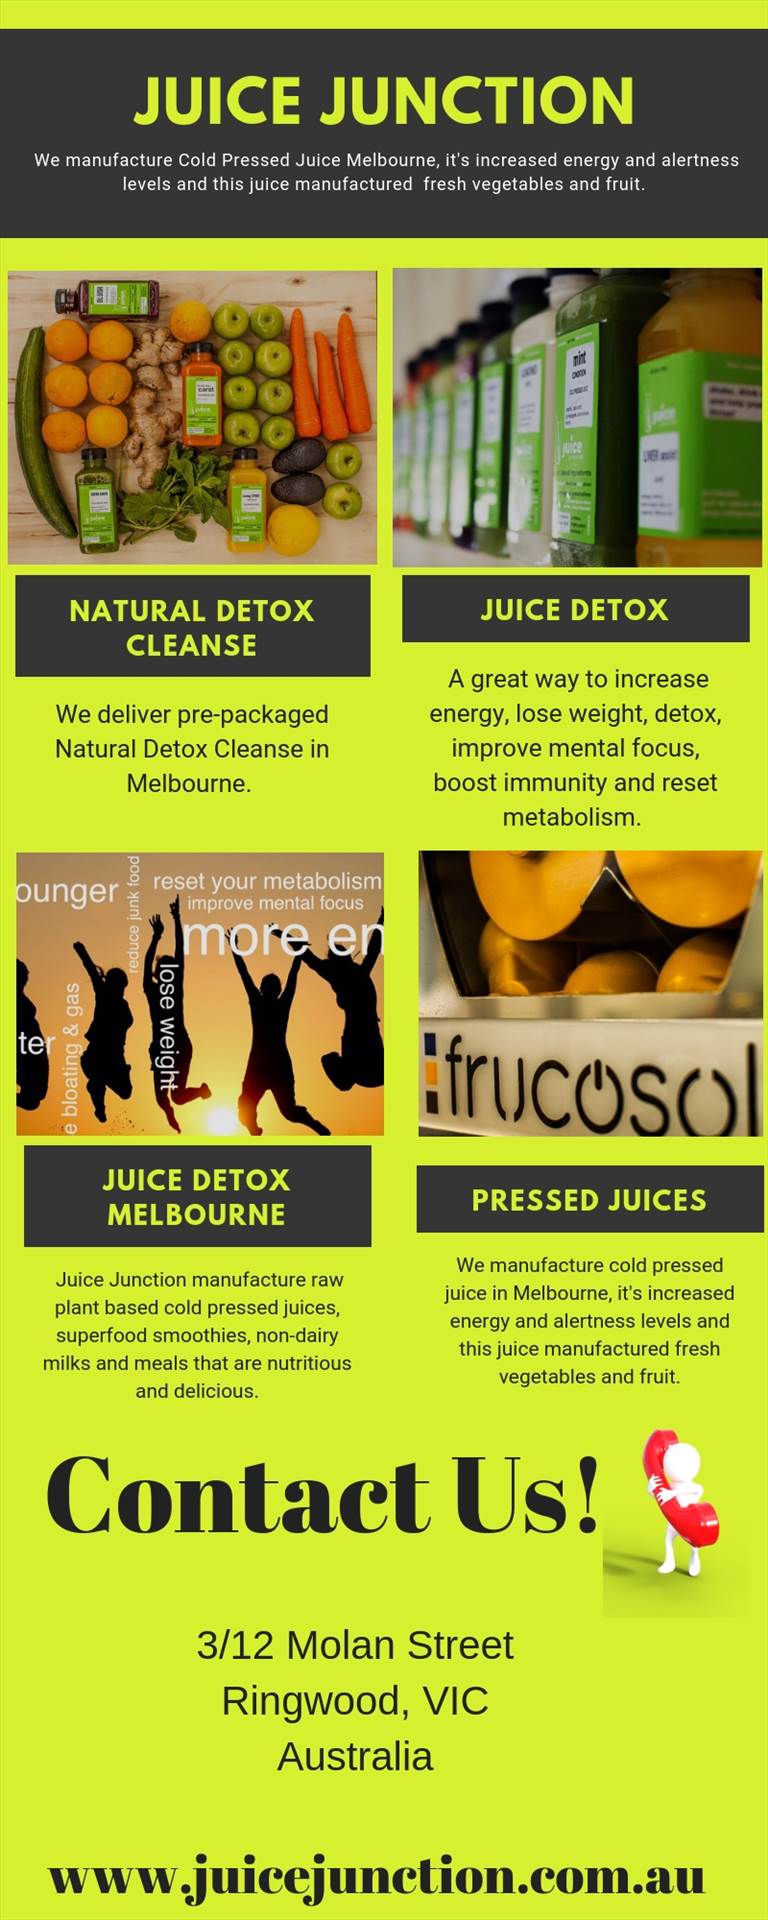 Juice Junction We manufacture Cold Pressed Juice Melbourne, it's increased energy and alertness levels and this juice manufactured  fresh vegetables and fruit. 
Website: https://www.juicejunction.com.au/ by Juicejunction